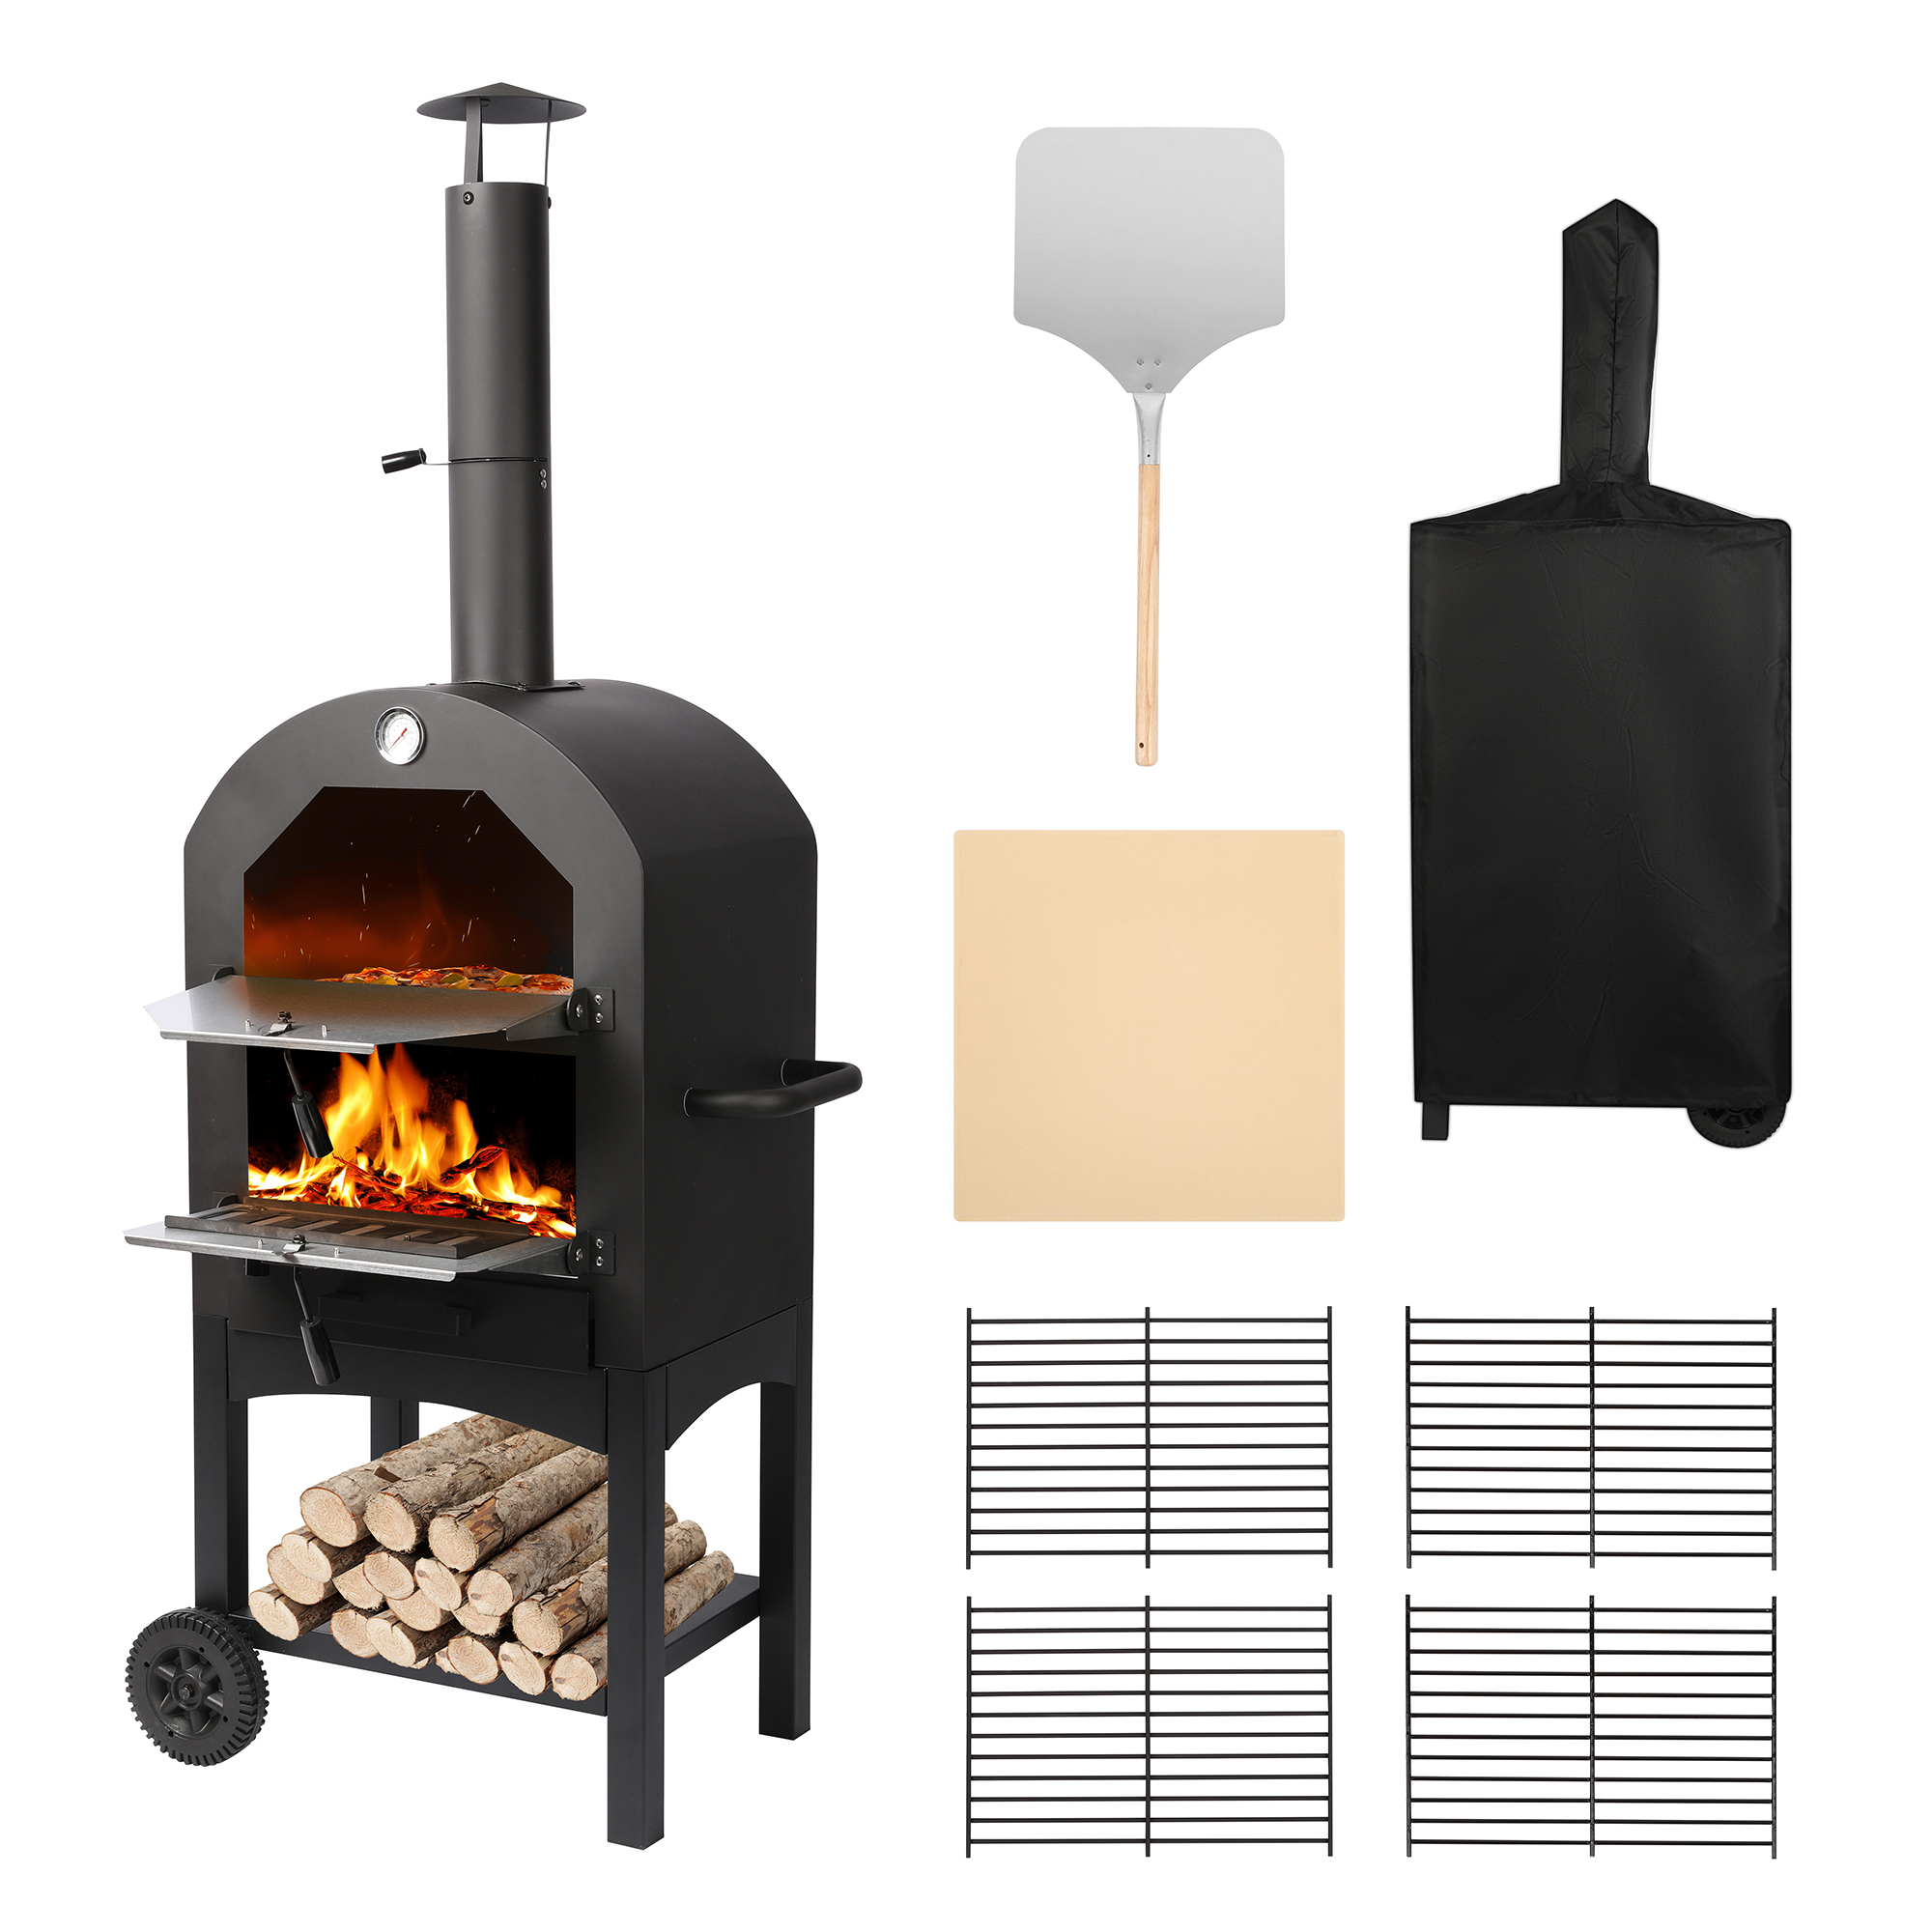 Tolead Outdoor Wood Burning Pizza Oven with Waterproof Cover, Black - image 1 of 11